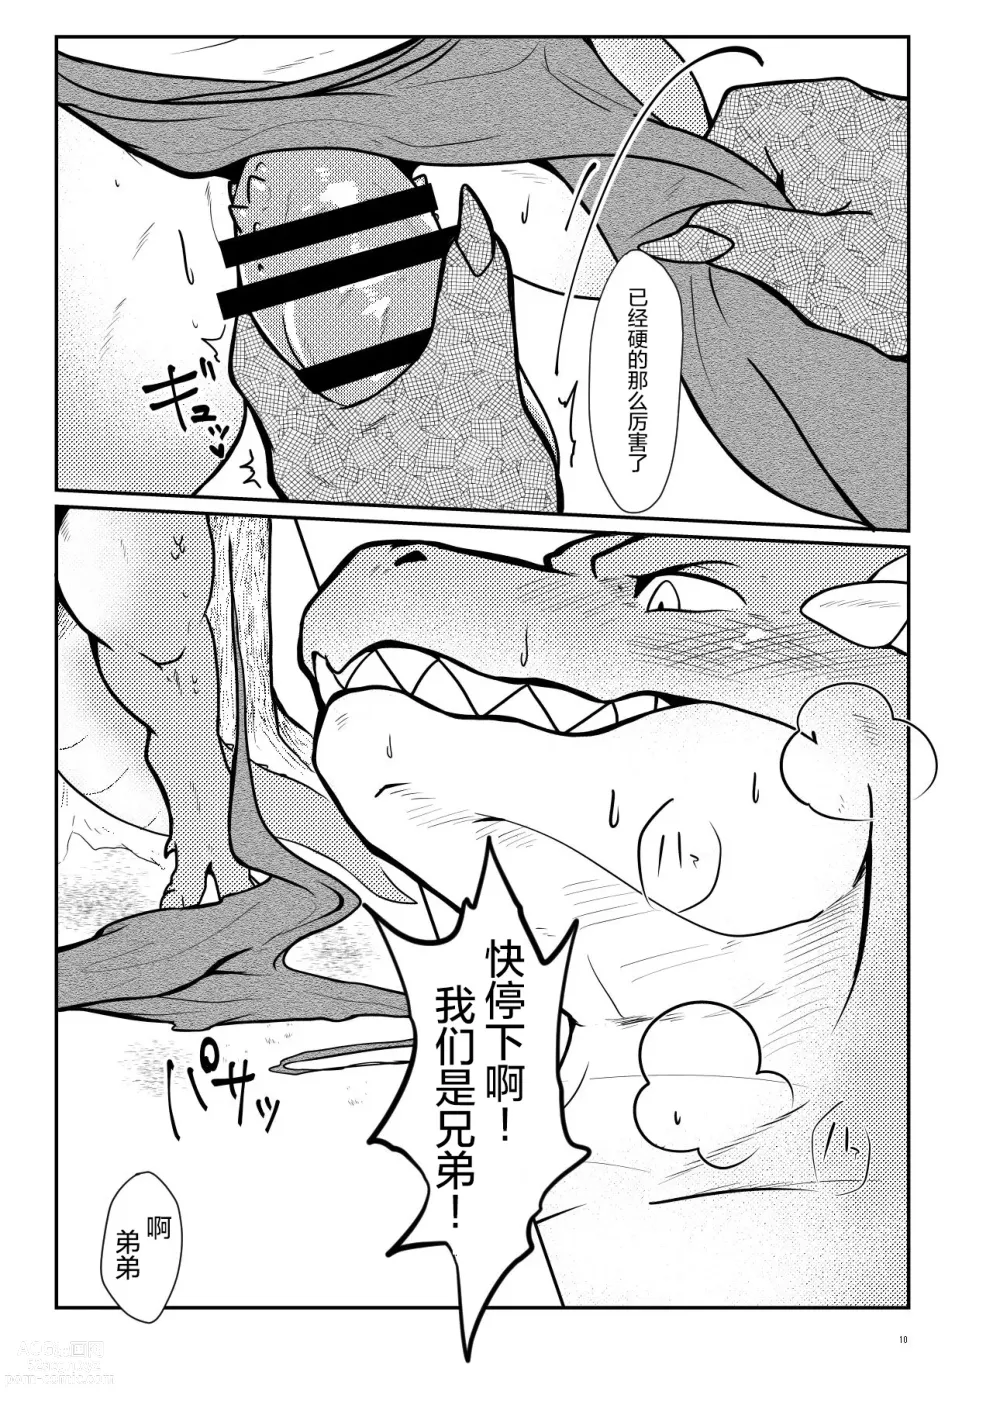 Page 10 of doujinshi 砰砰砰心乱跳